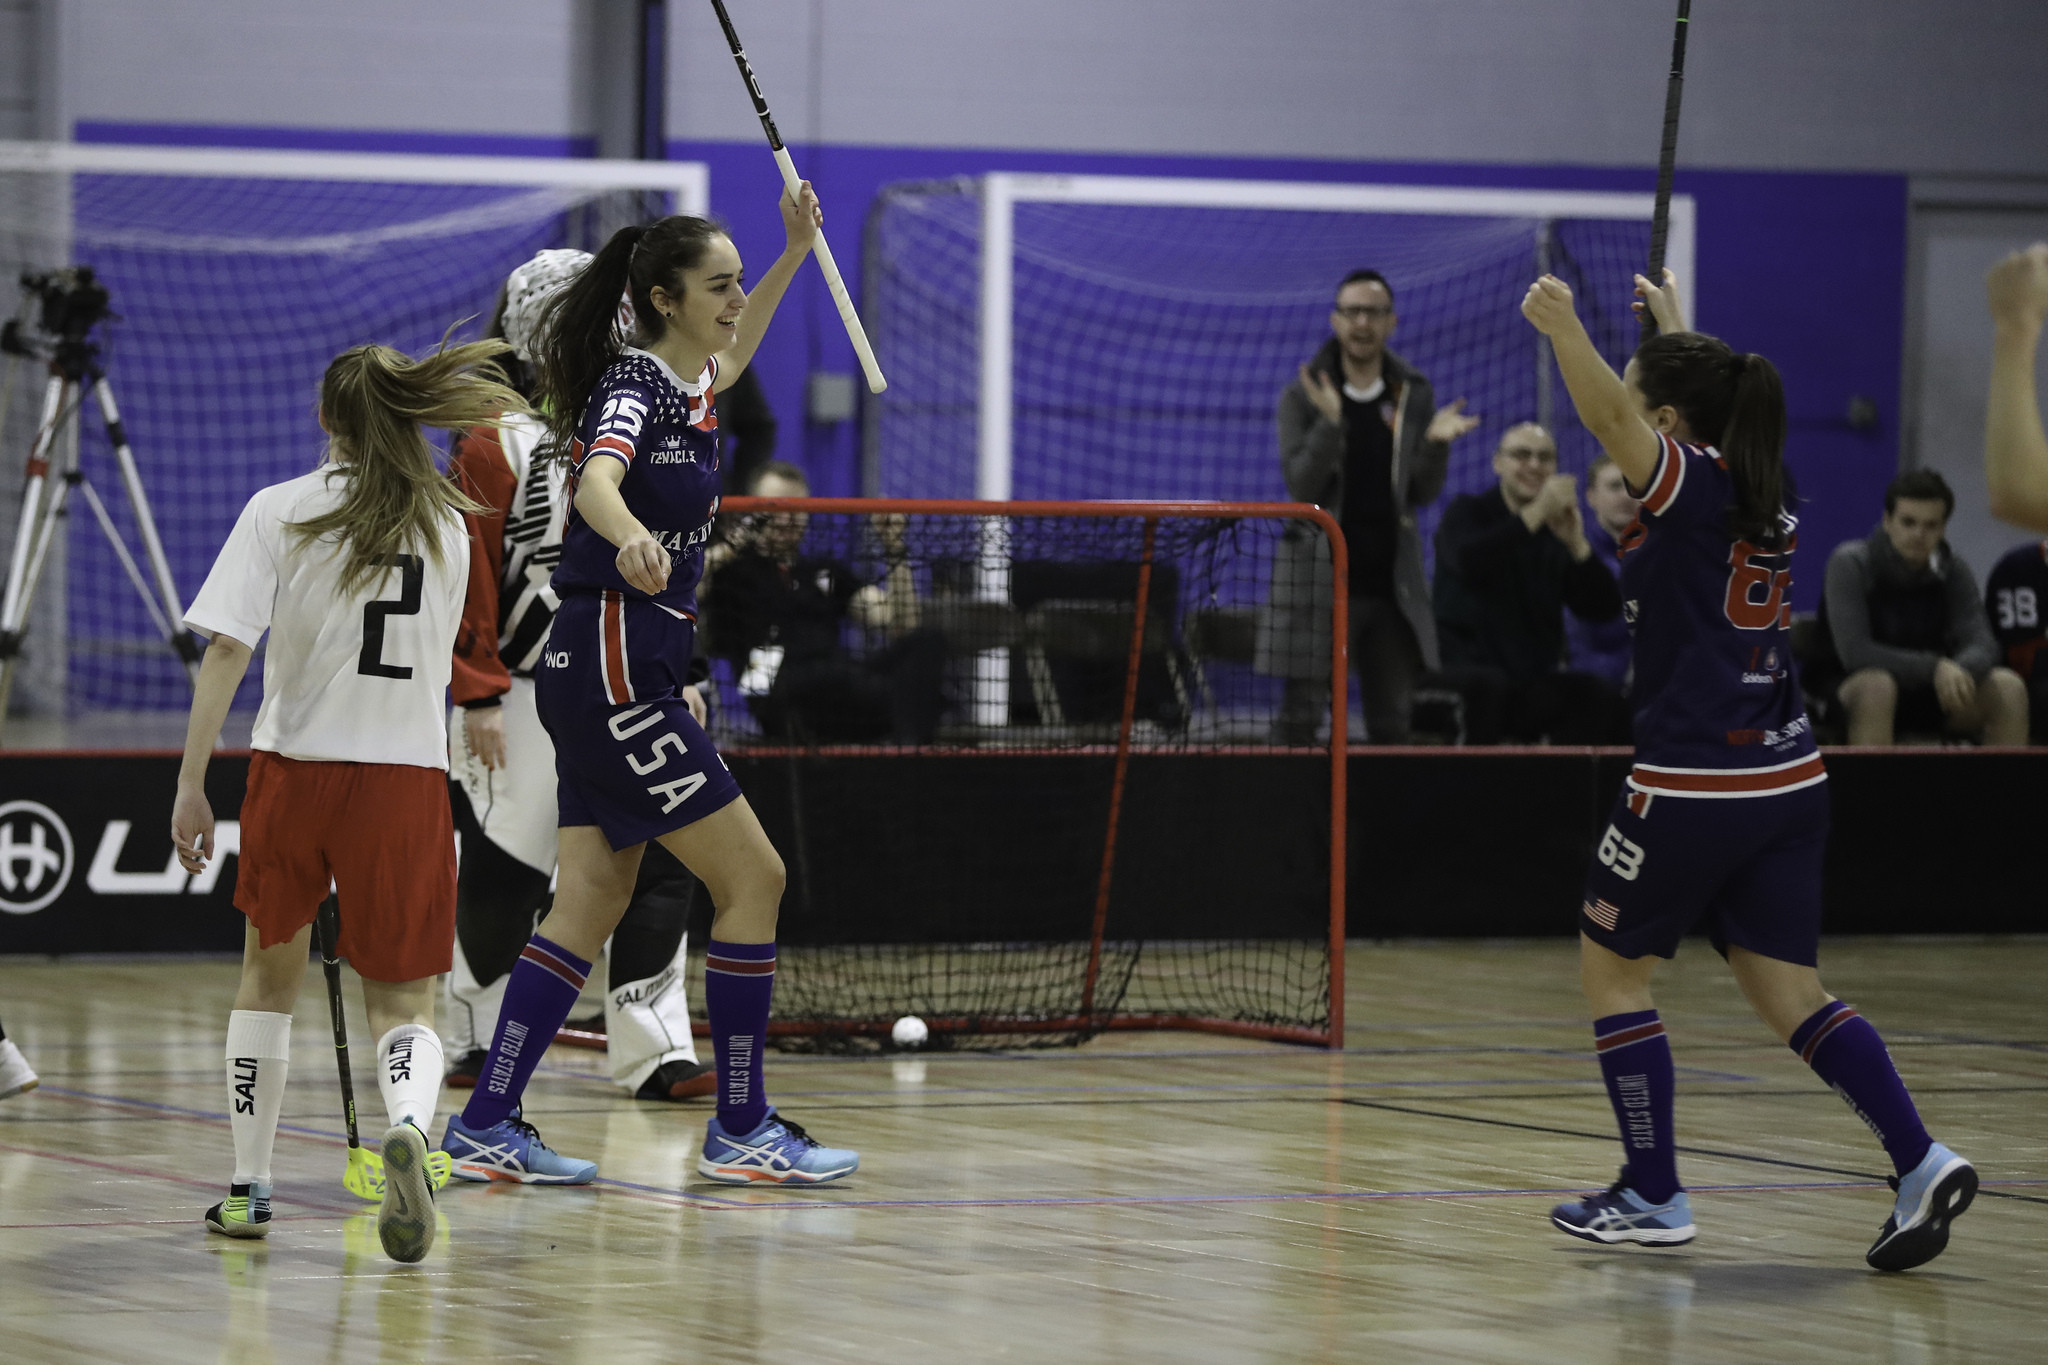 United States eased to victory in the first playoff match against Canada for this year's Women's World Floorball Championships ©IFF